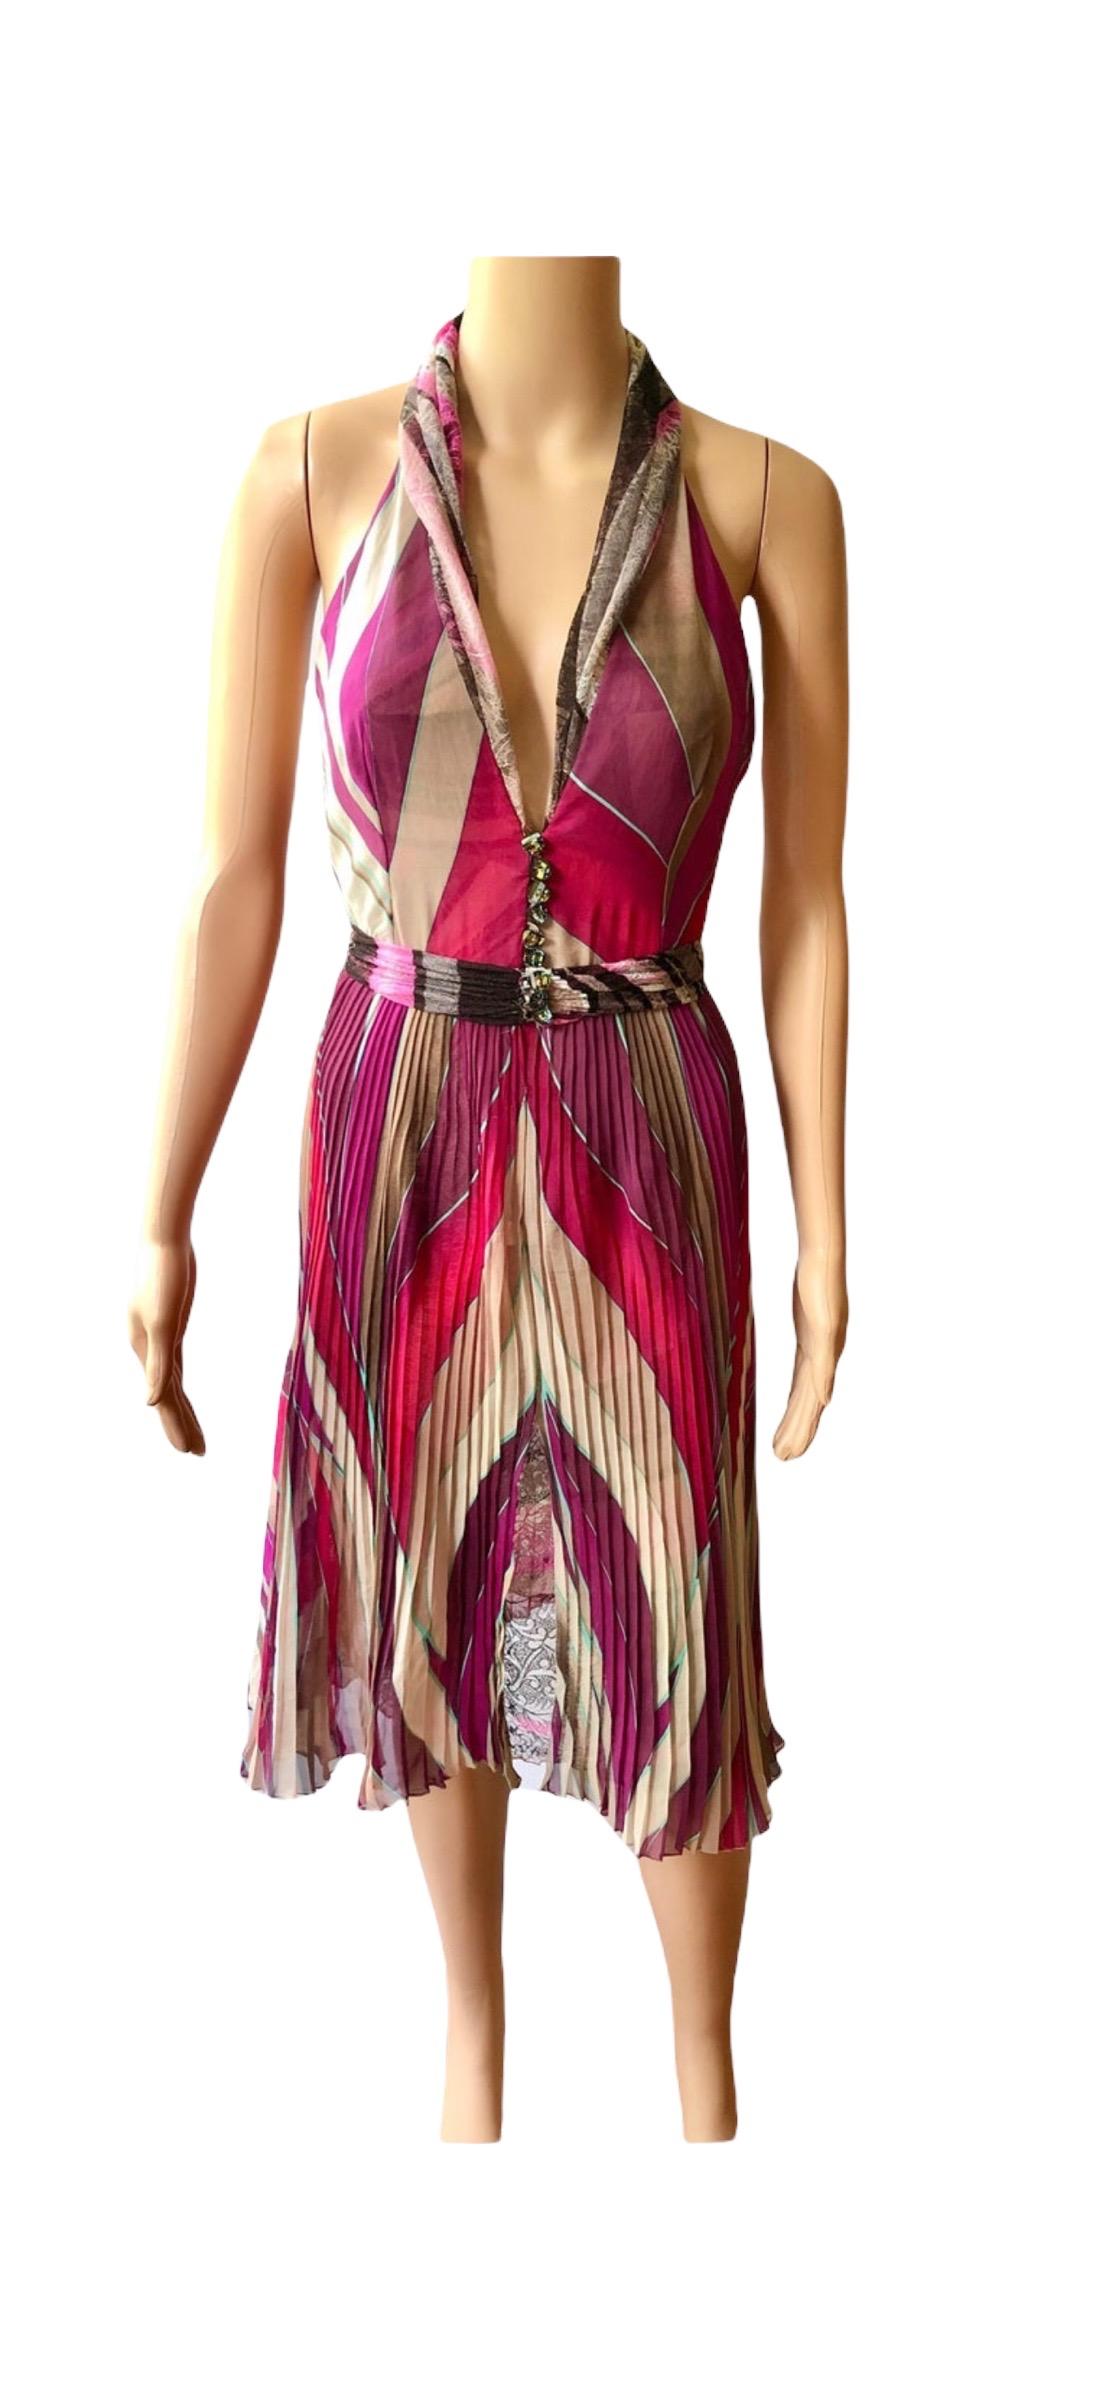 Gianni Versace F/W 2000 Runway Plunged Geometric Print Open Back Pleated Dress For Sale 4